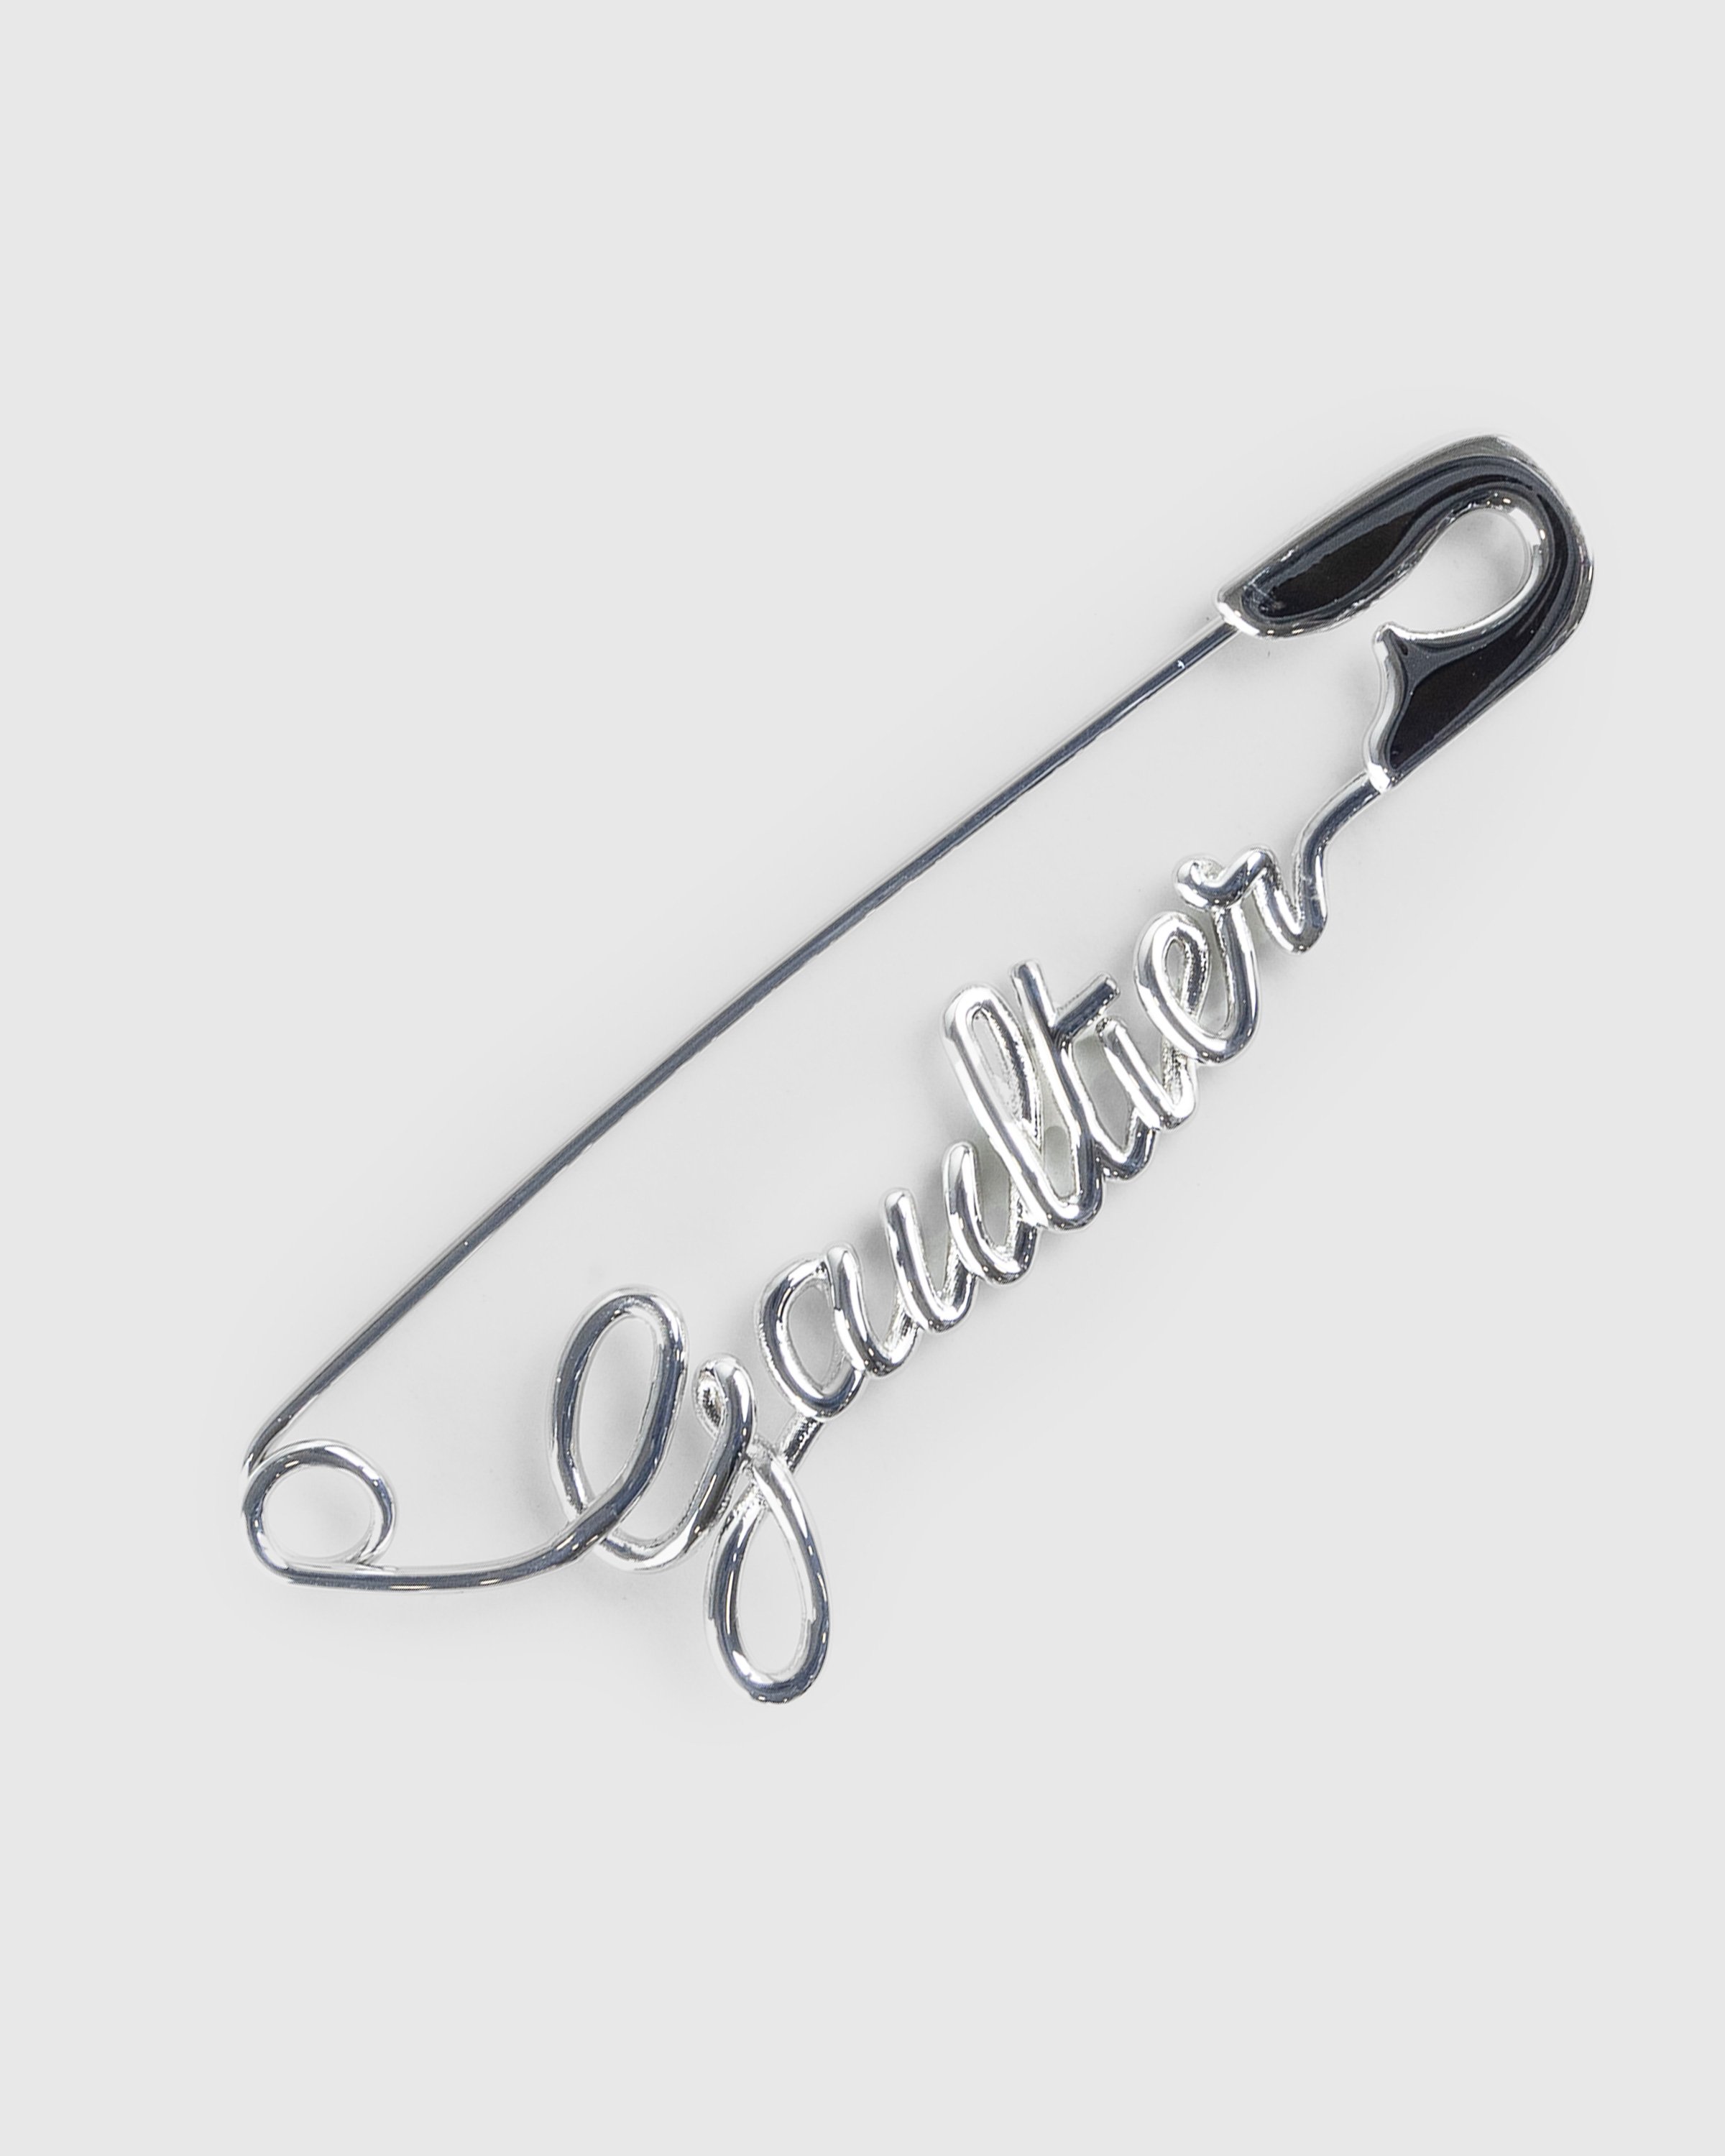 Jean Paul Gaultier - Safety Pin Gaultier Earring Silver - Accessories - Silver - Image 2